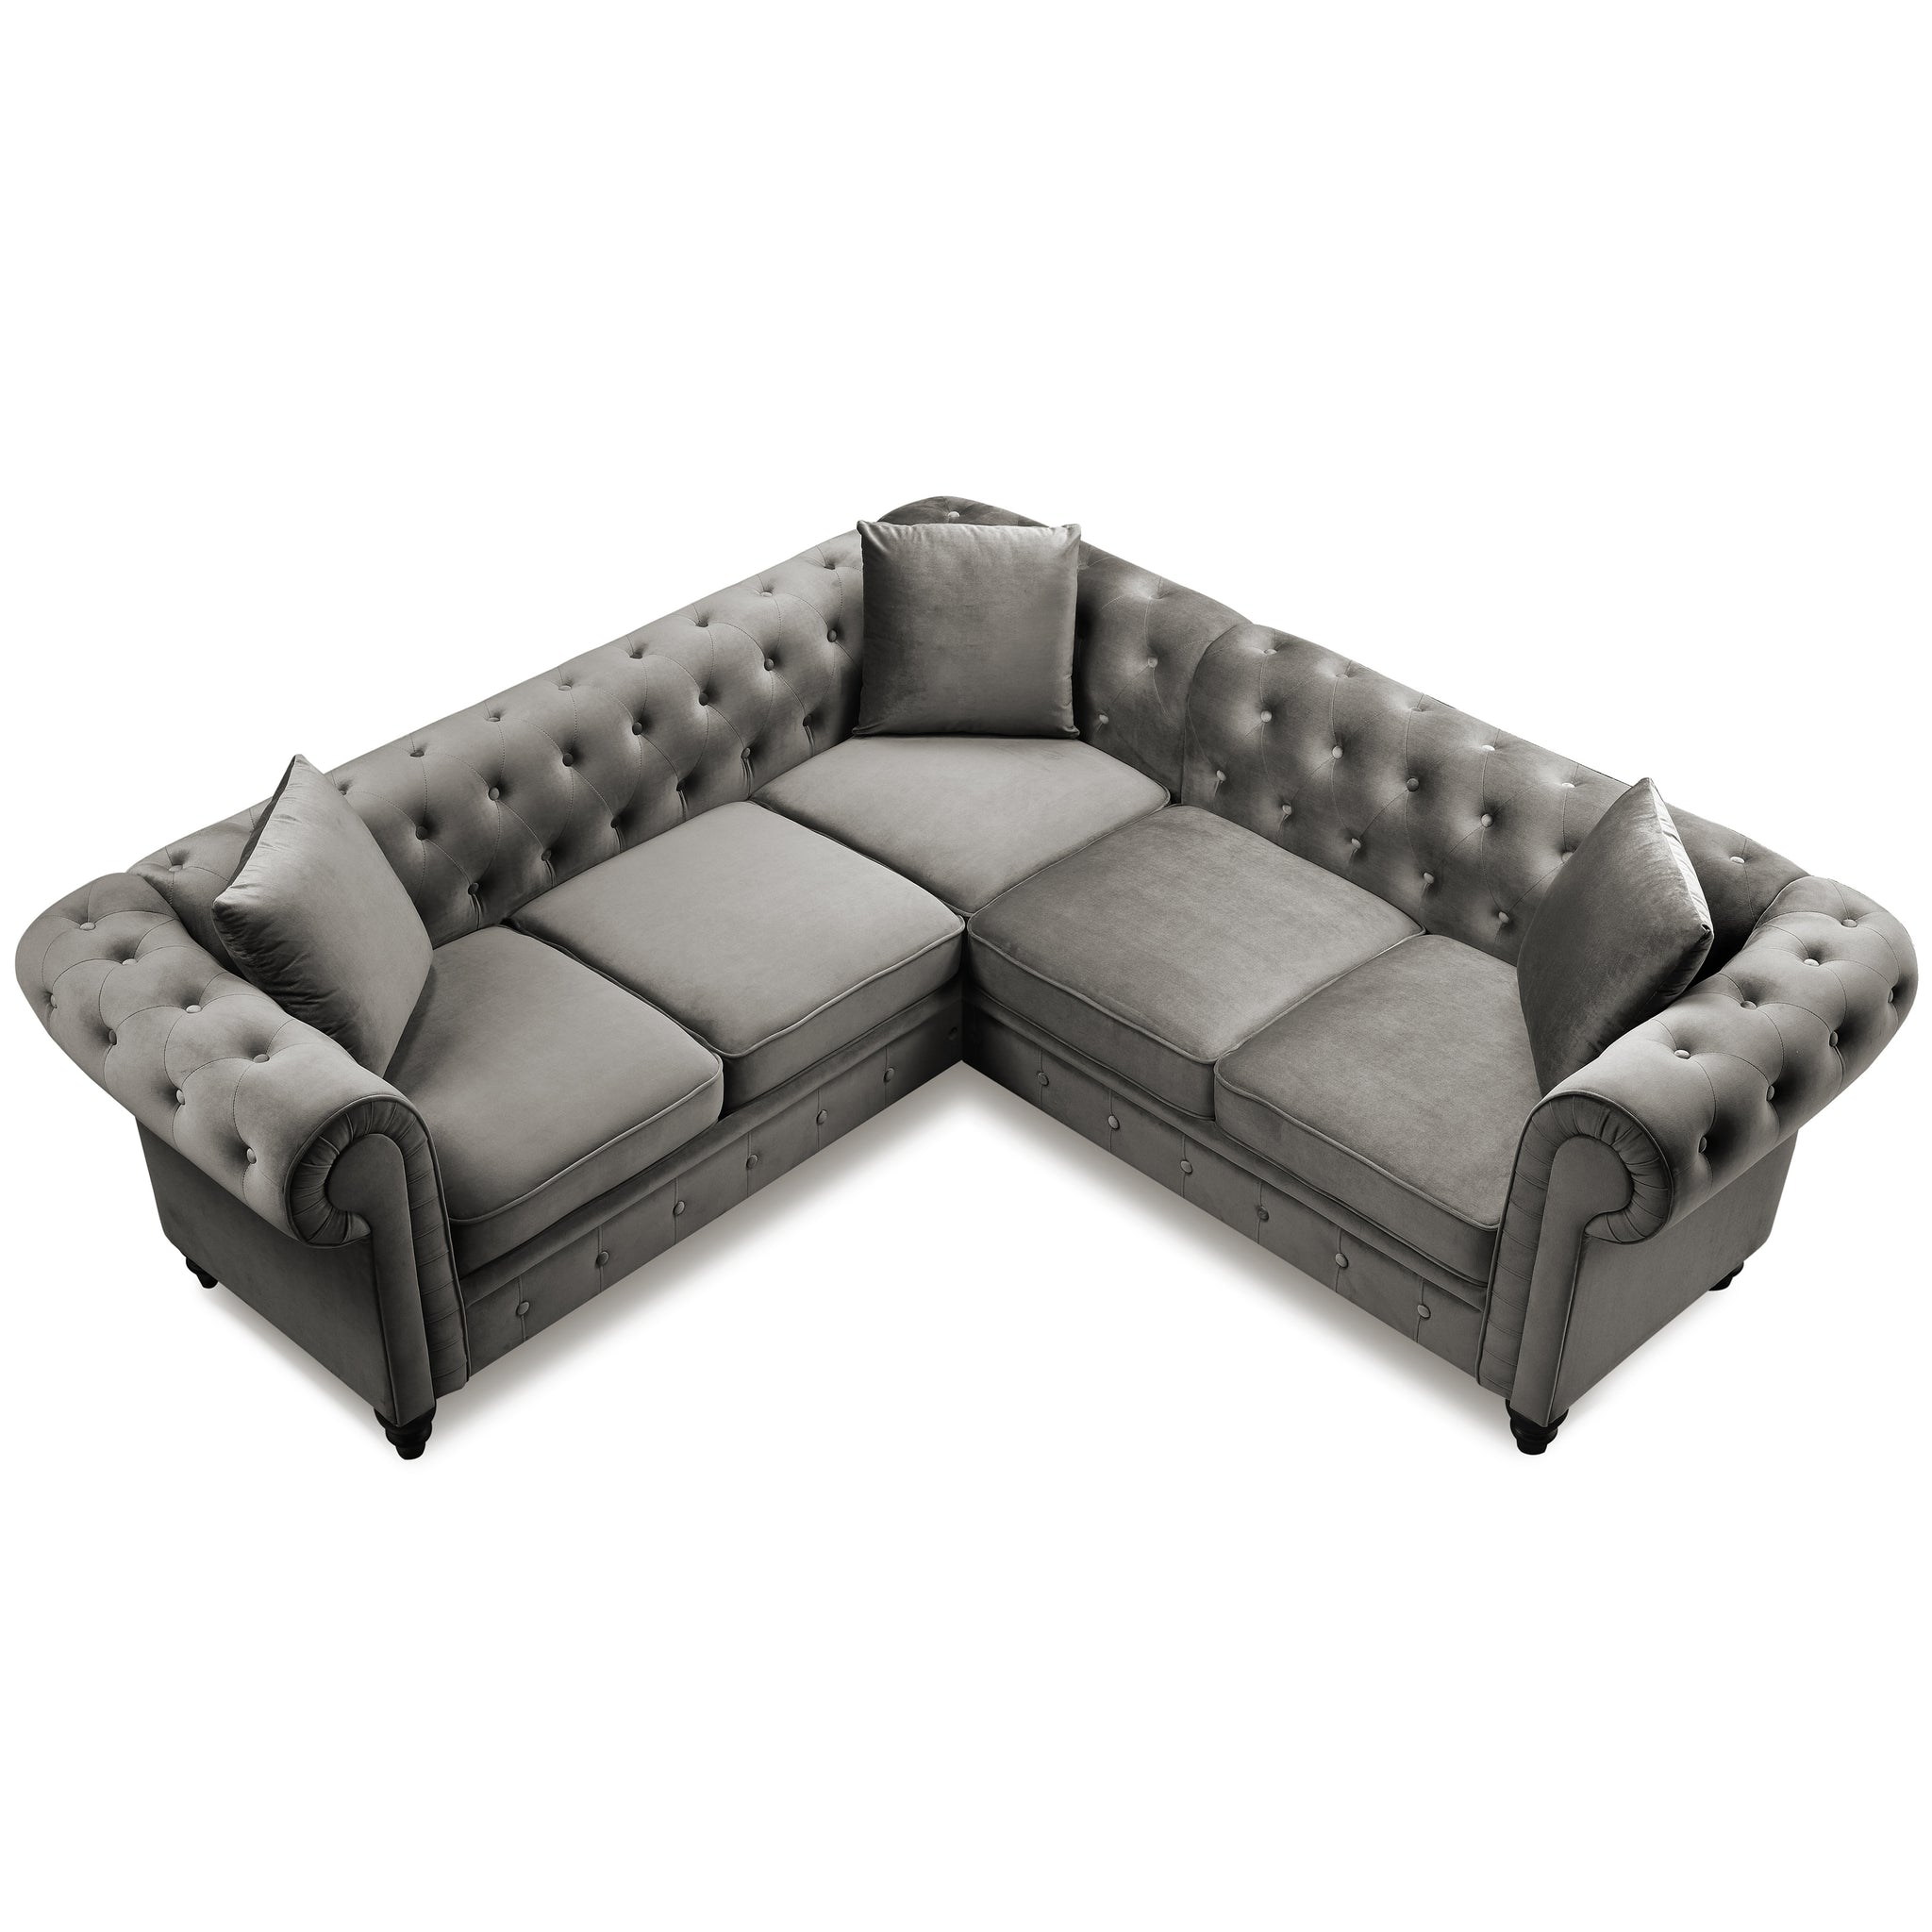 80*80*28" Deep Button Tufted Velvet Upholstered Rolled Arm Classic Chesterfield L Shaped Sectional Sofa 3 Pillows Included-Grey